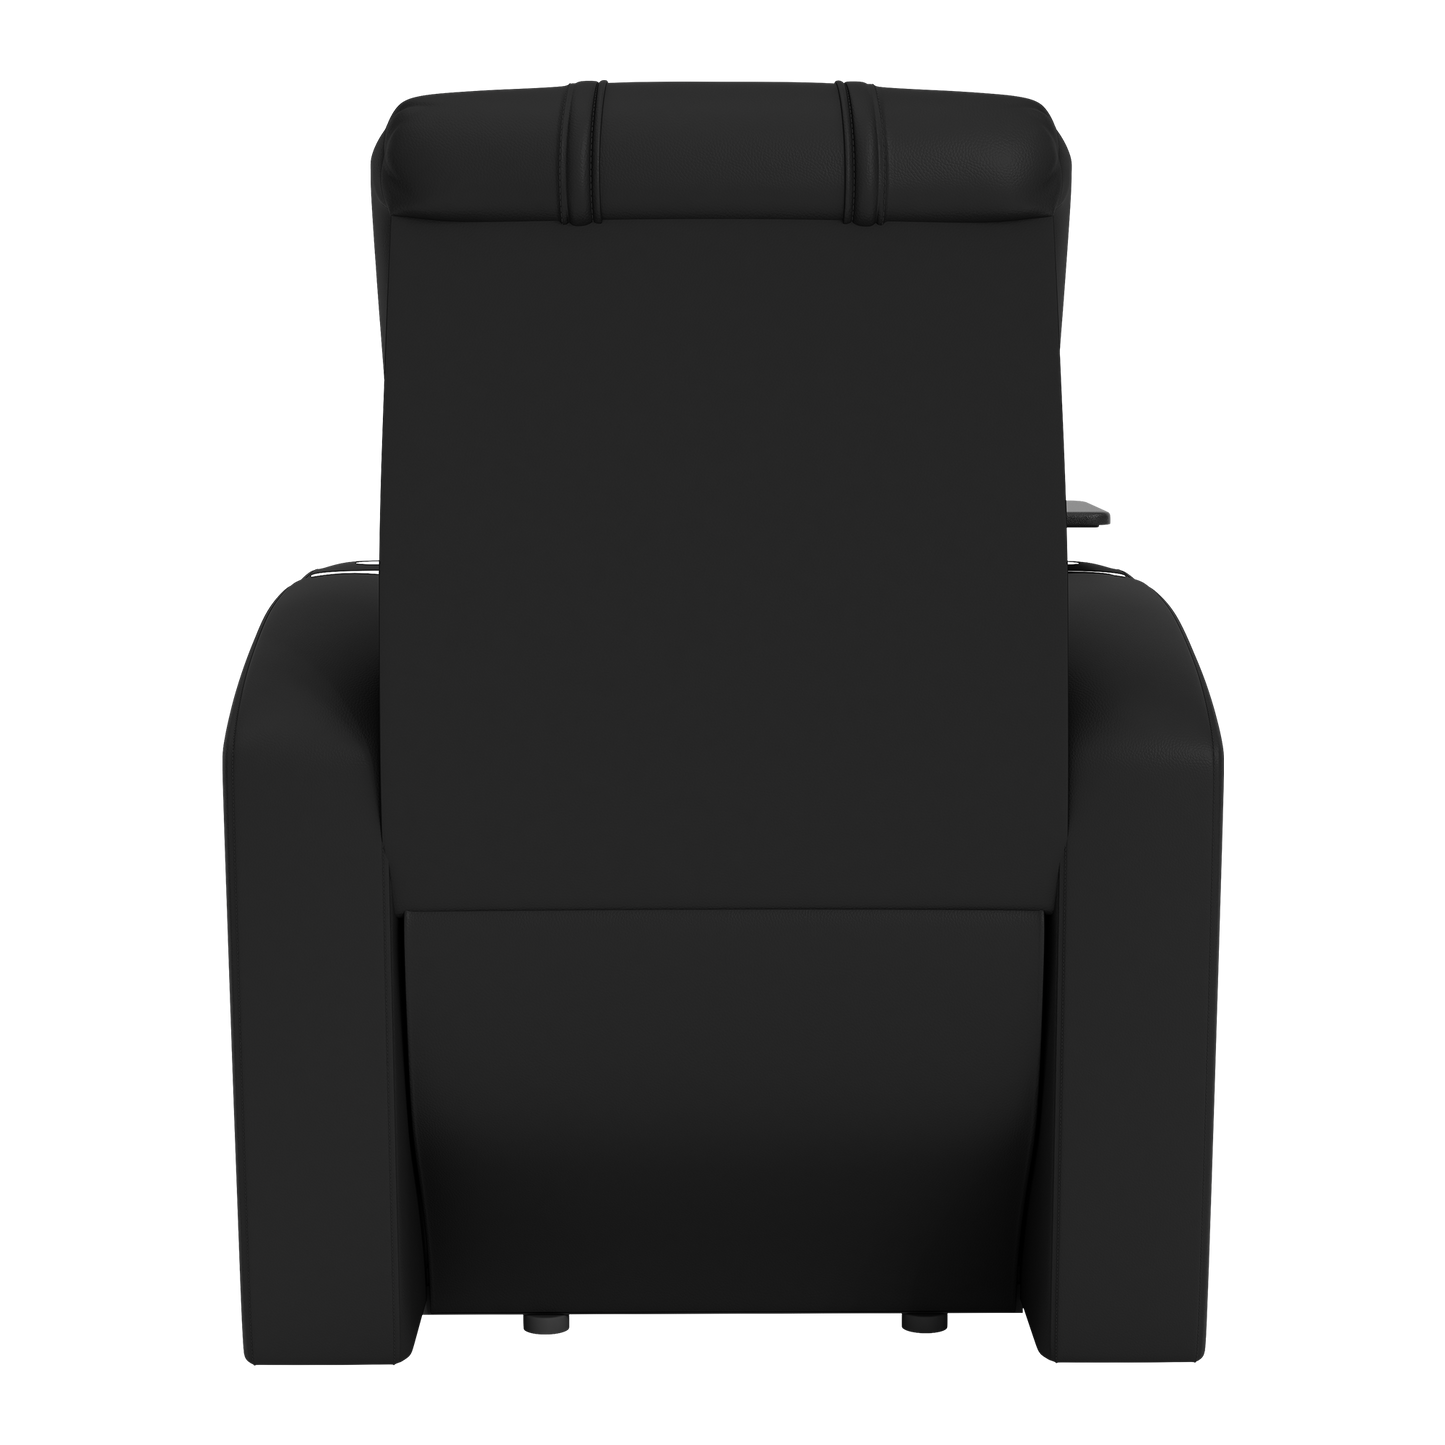 Stealth Power Plus Recliner with Wichita State Primary Logo